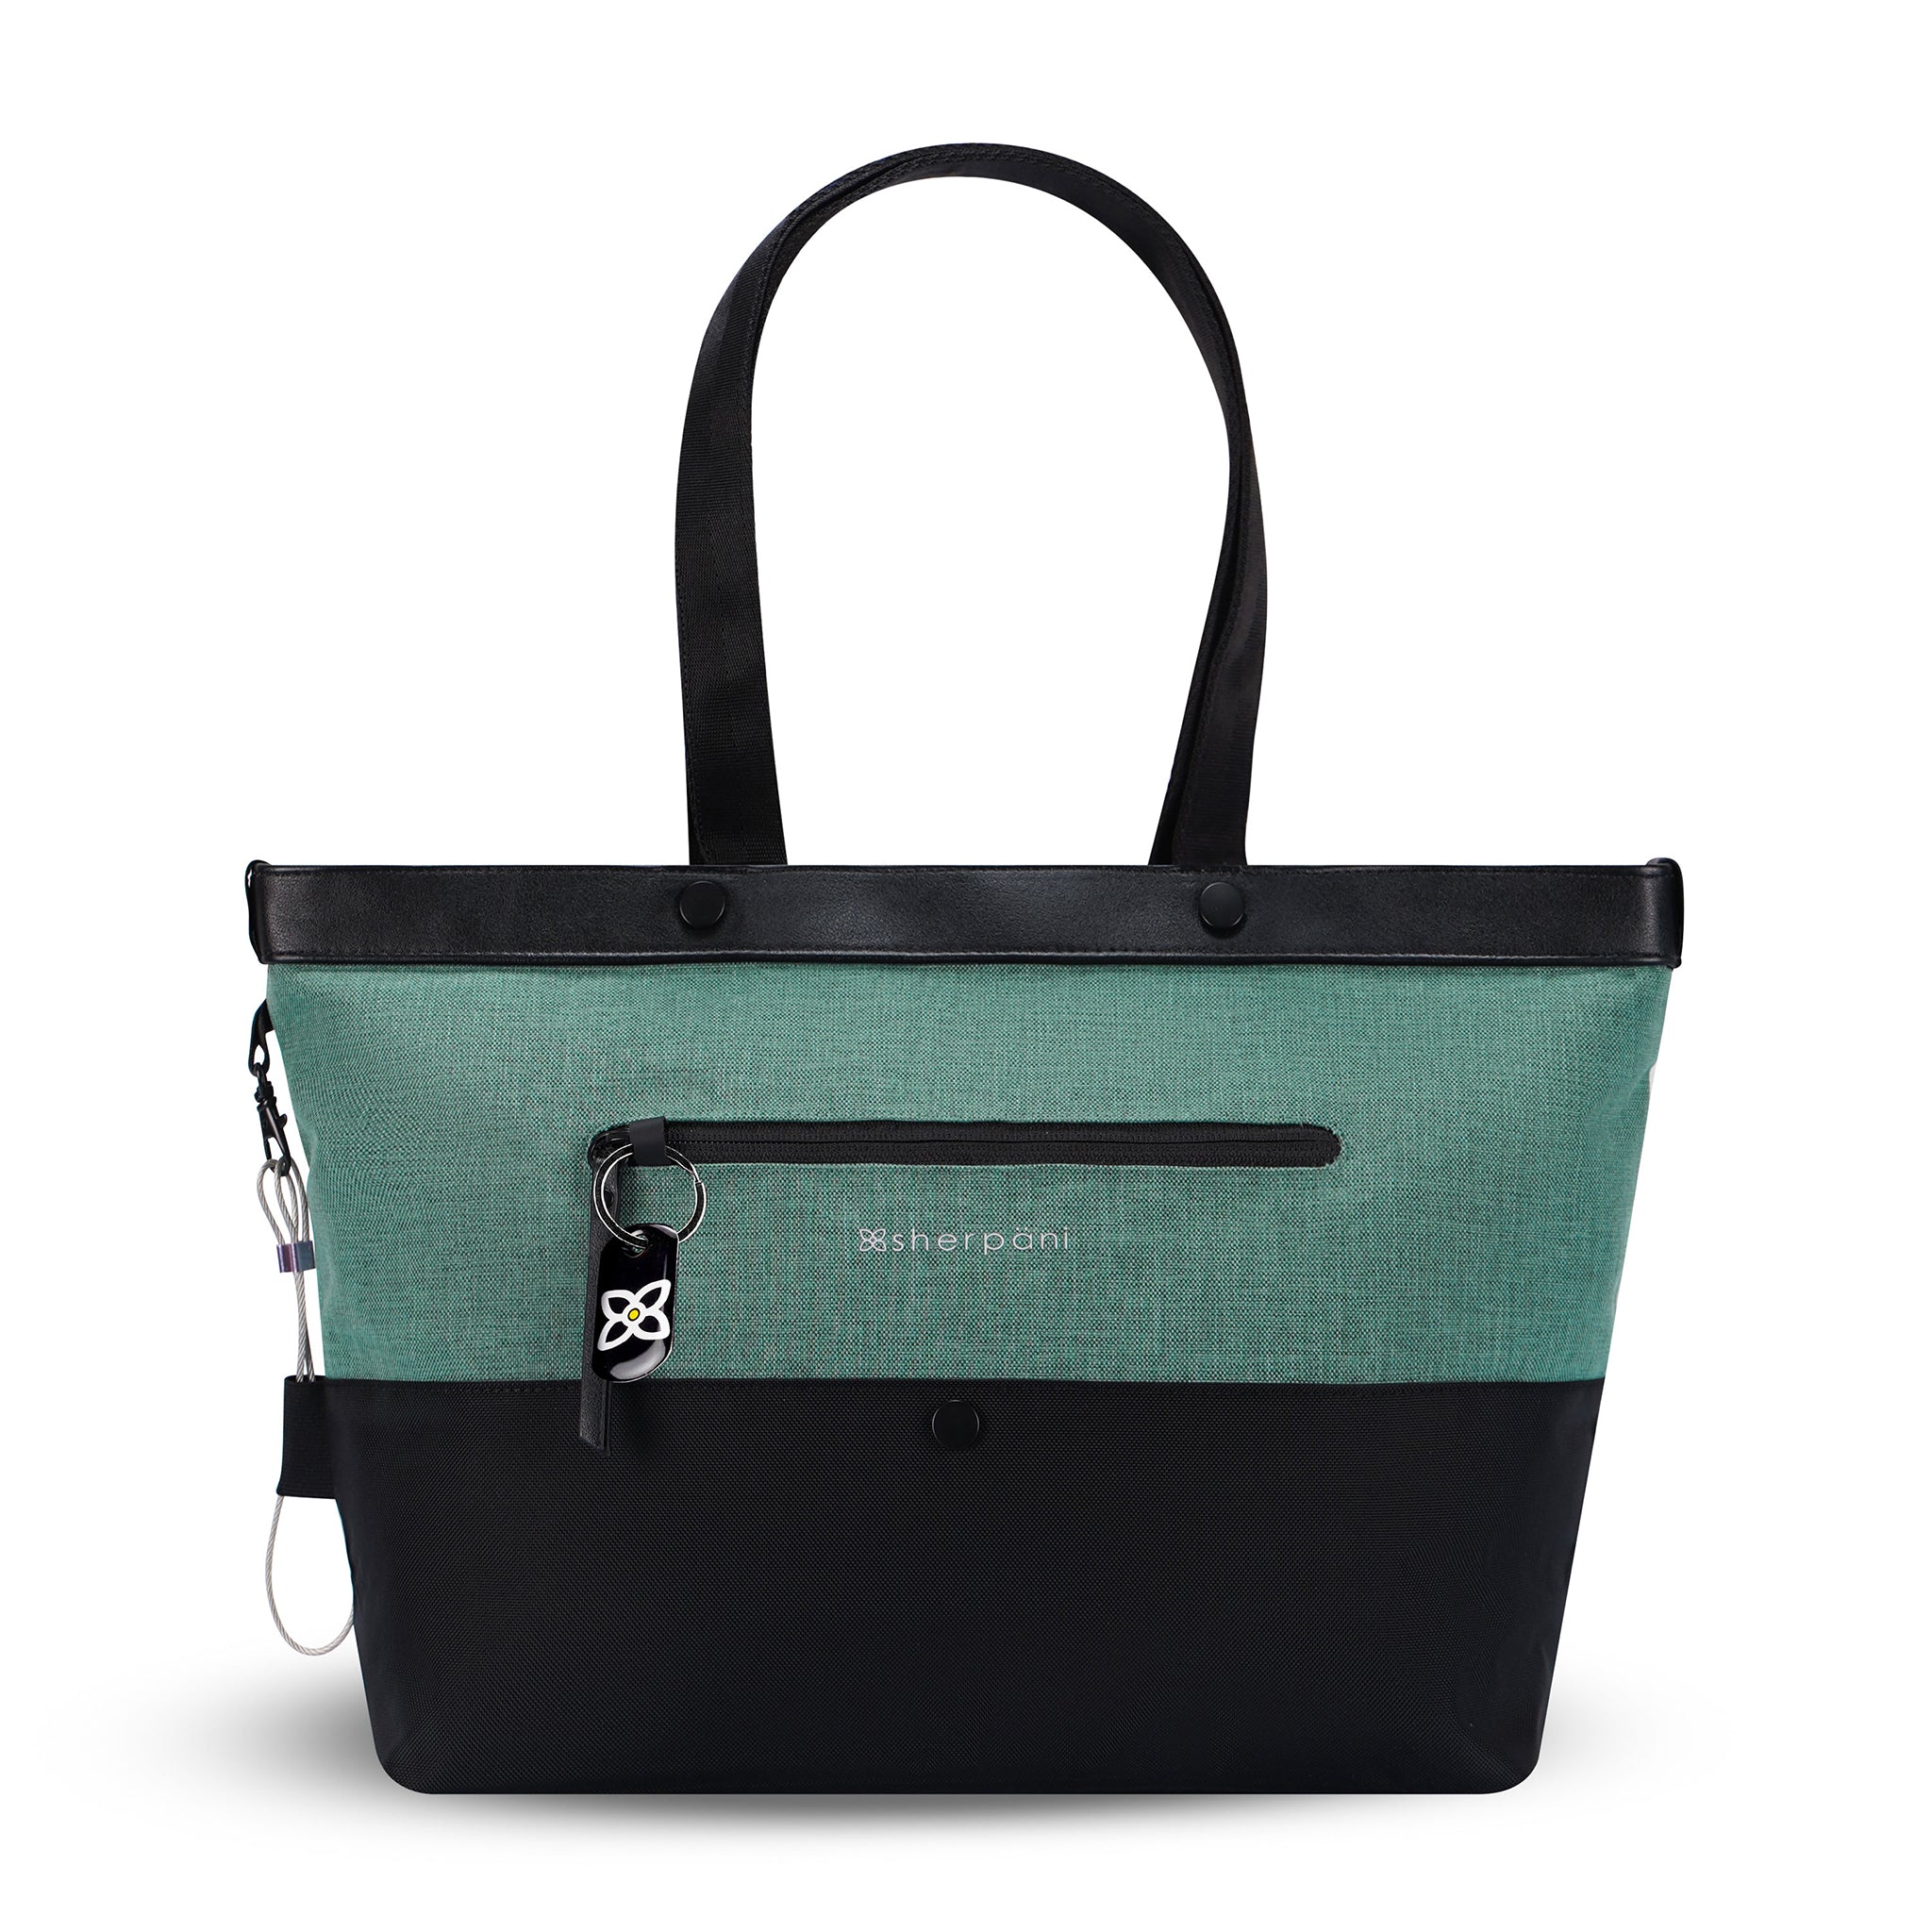 Flat front view of Sherpani's Anti-Theft tote, the Cali AT in Teal, with vegan leather accents in black. There is an external compartment on the front of the bag with a locking zipper and ReturnMe tag. A chair loop lock is clipped to the side of the bag and is held in place by an elastic tab. 